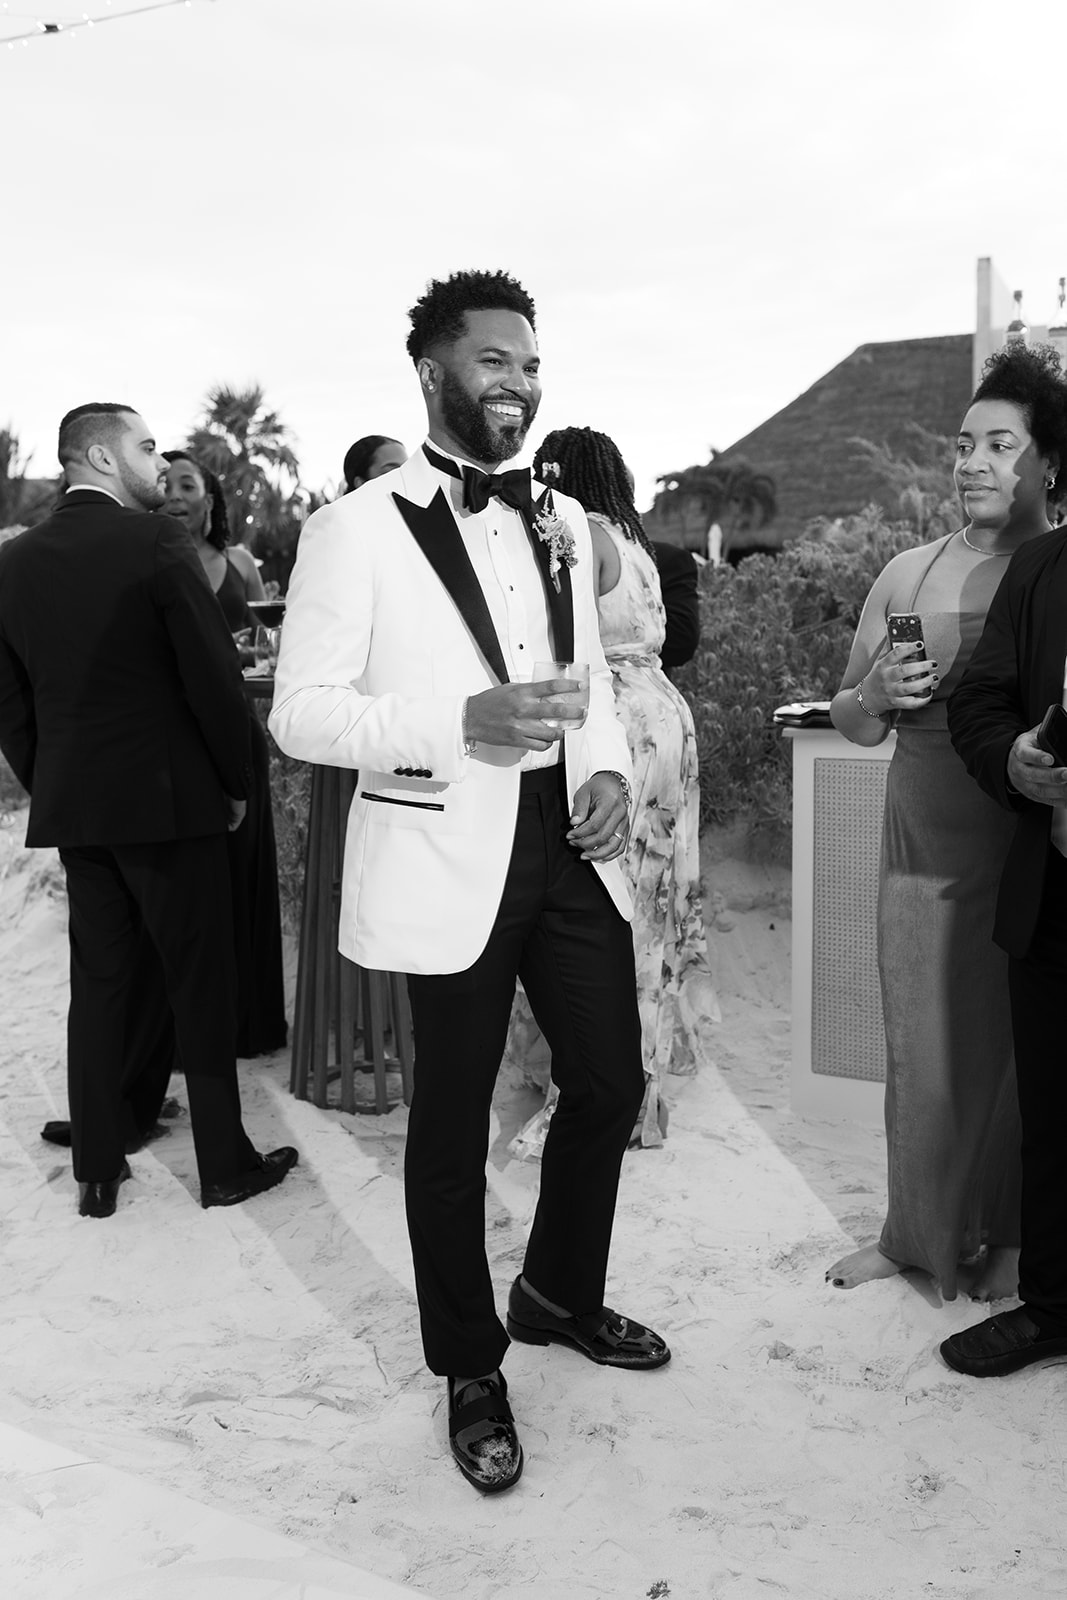 Lee in a tuxedo smiling
